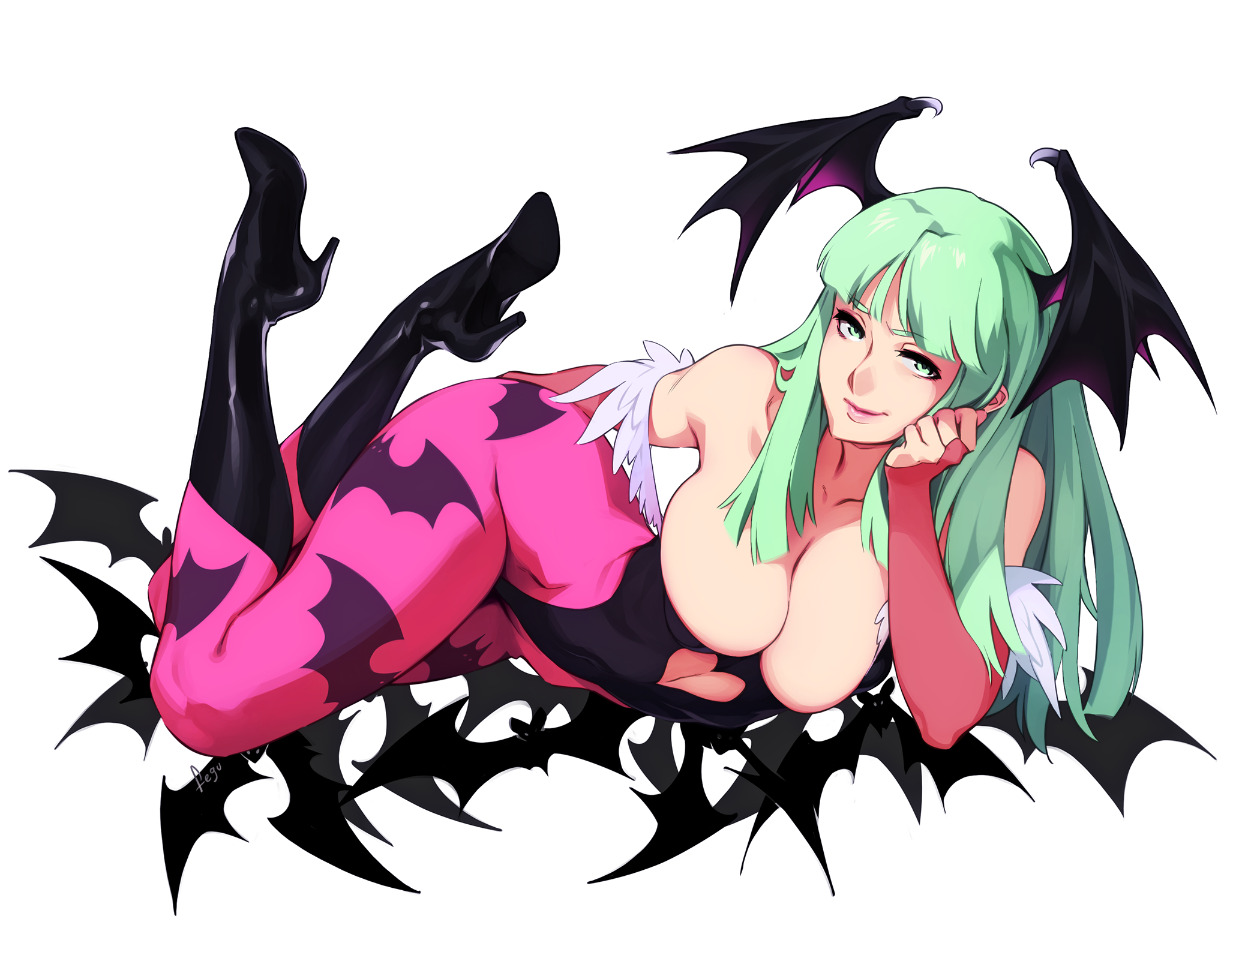 mugis-pie:Once I drew Lilith, I couldn’t go long without doing big-sis too…Here’s